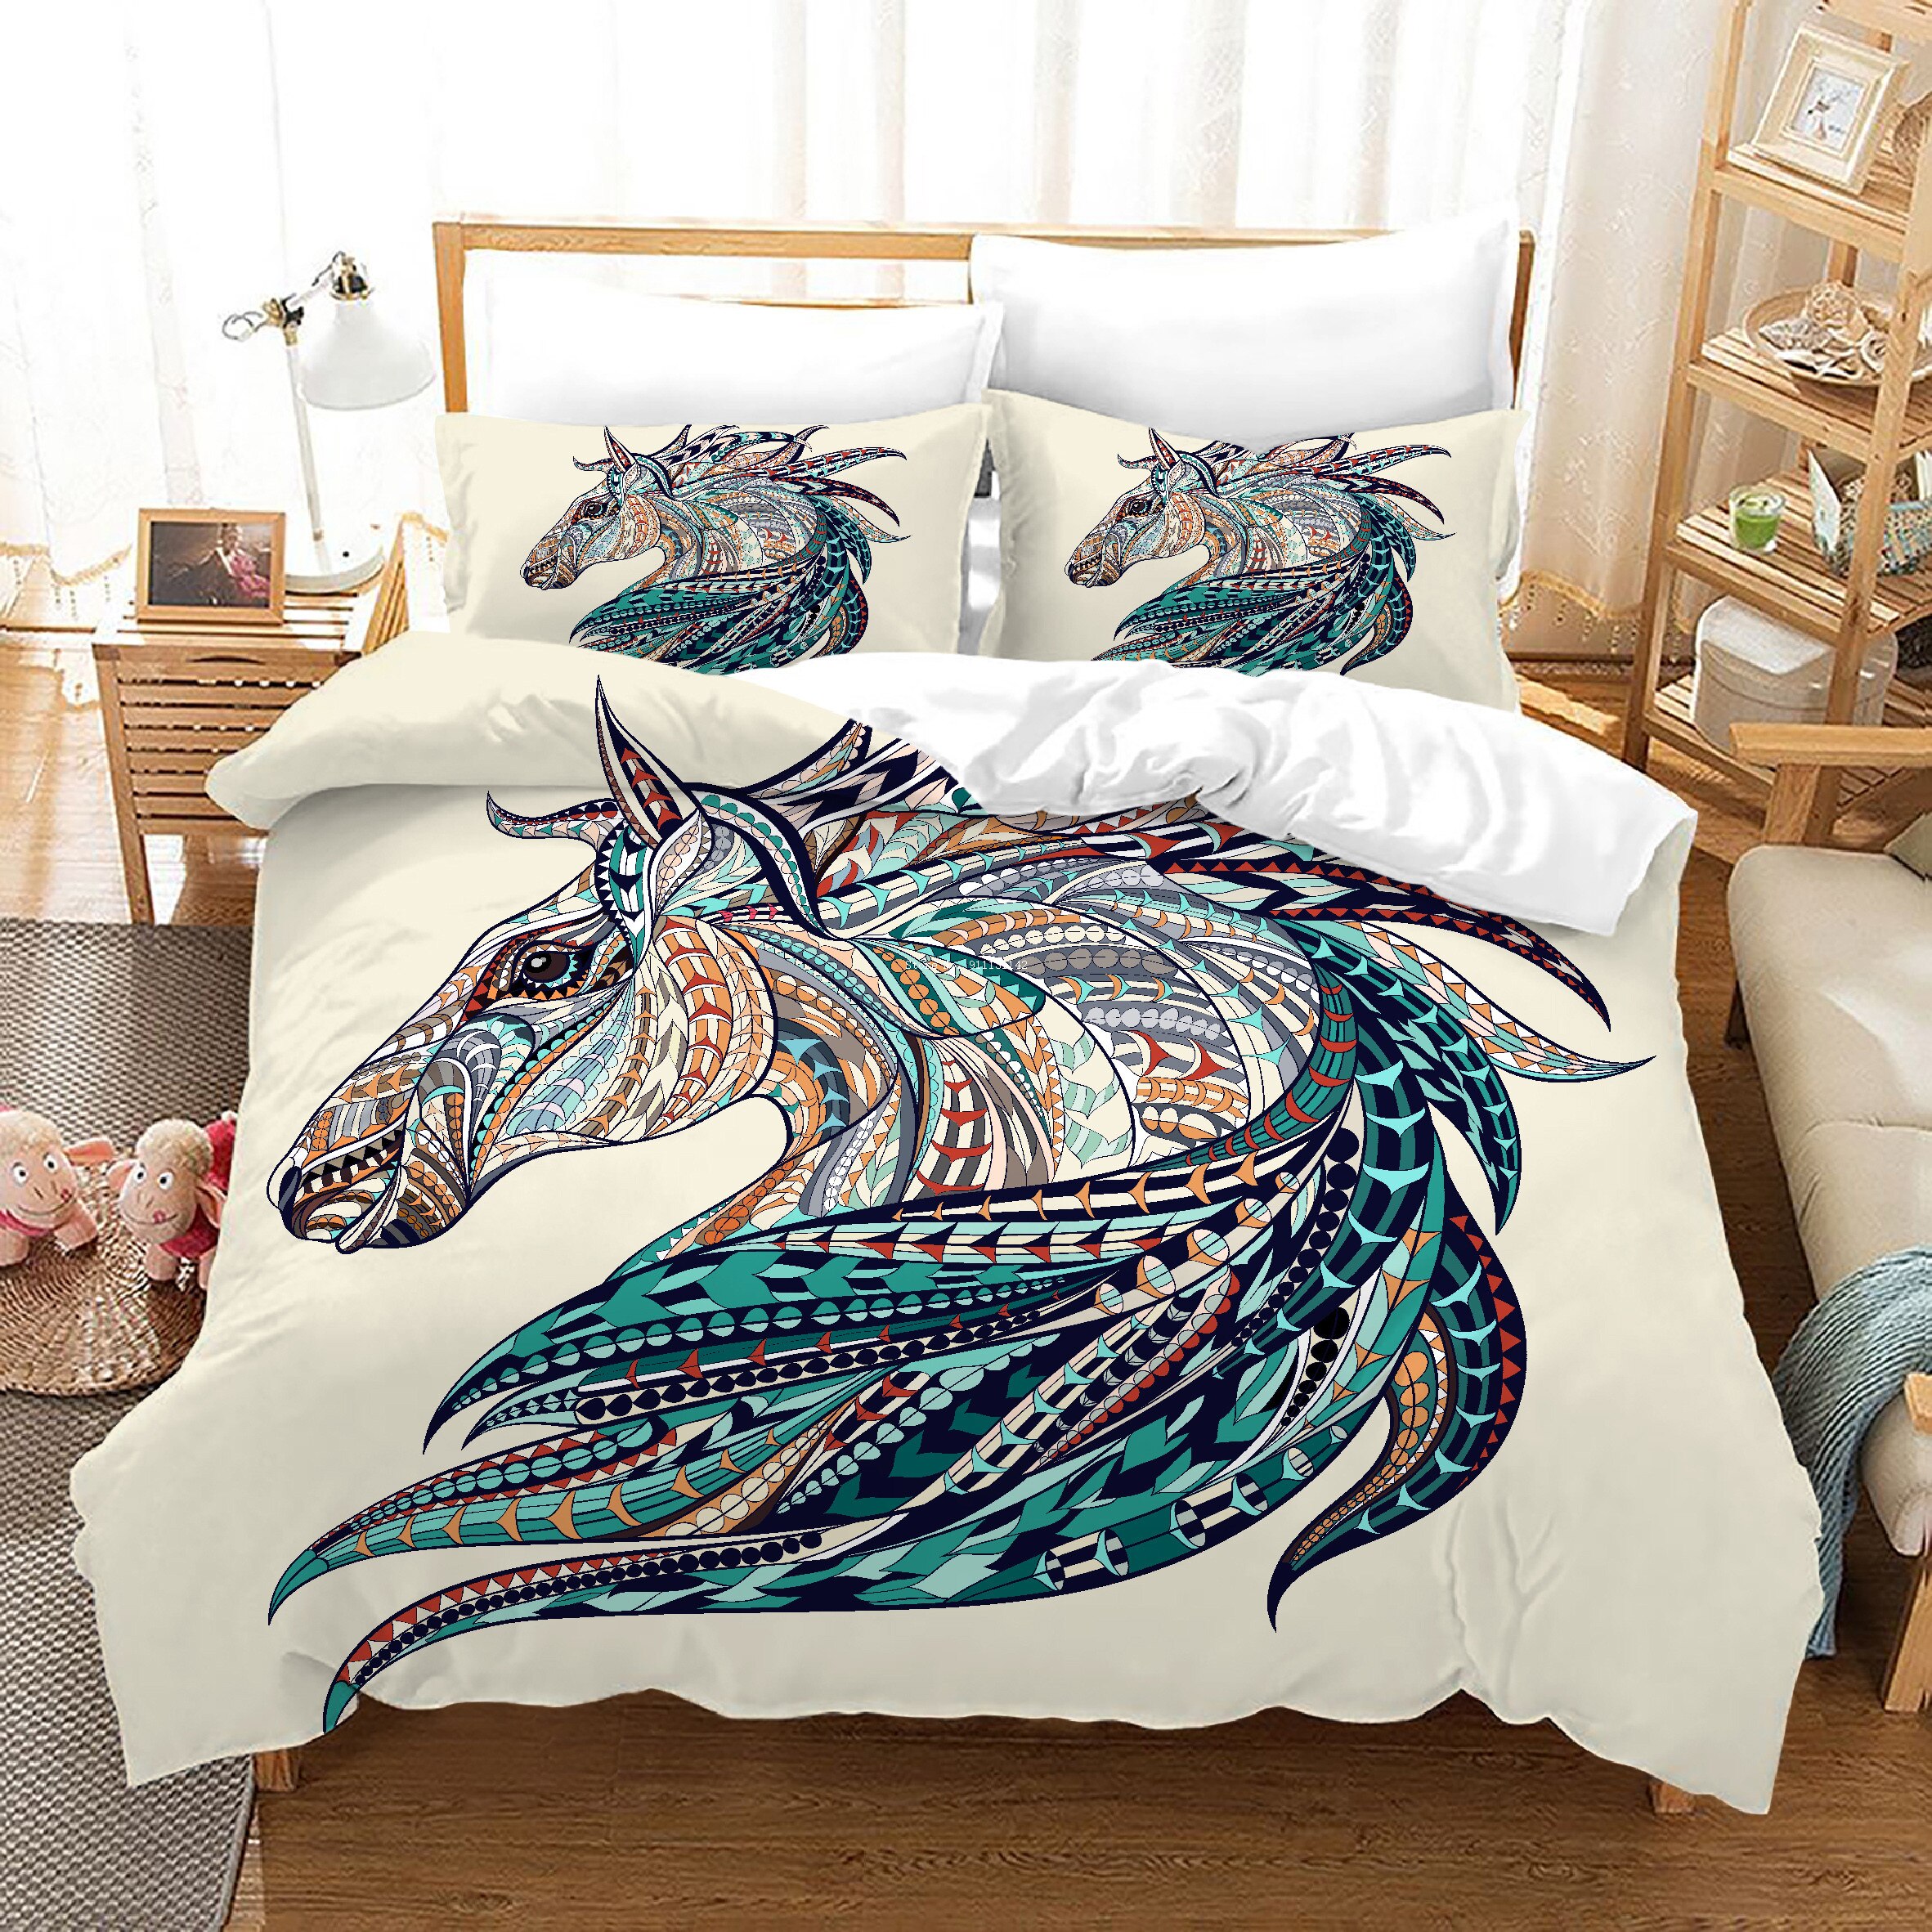 2/3PCS Colored Bohemian Animal Style Bedding Set Bedroom Decorations Warm and Comfortable Down Bedcover Pillowcase